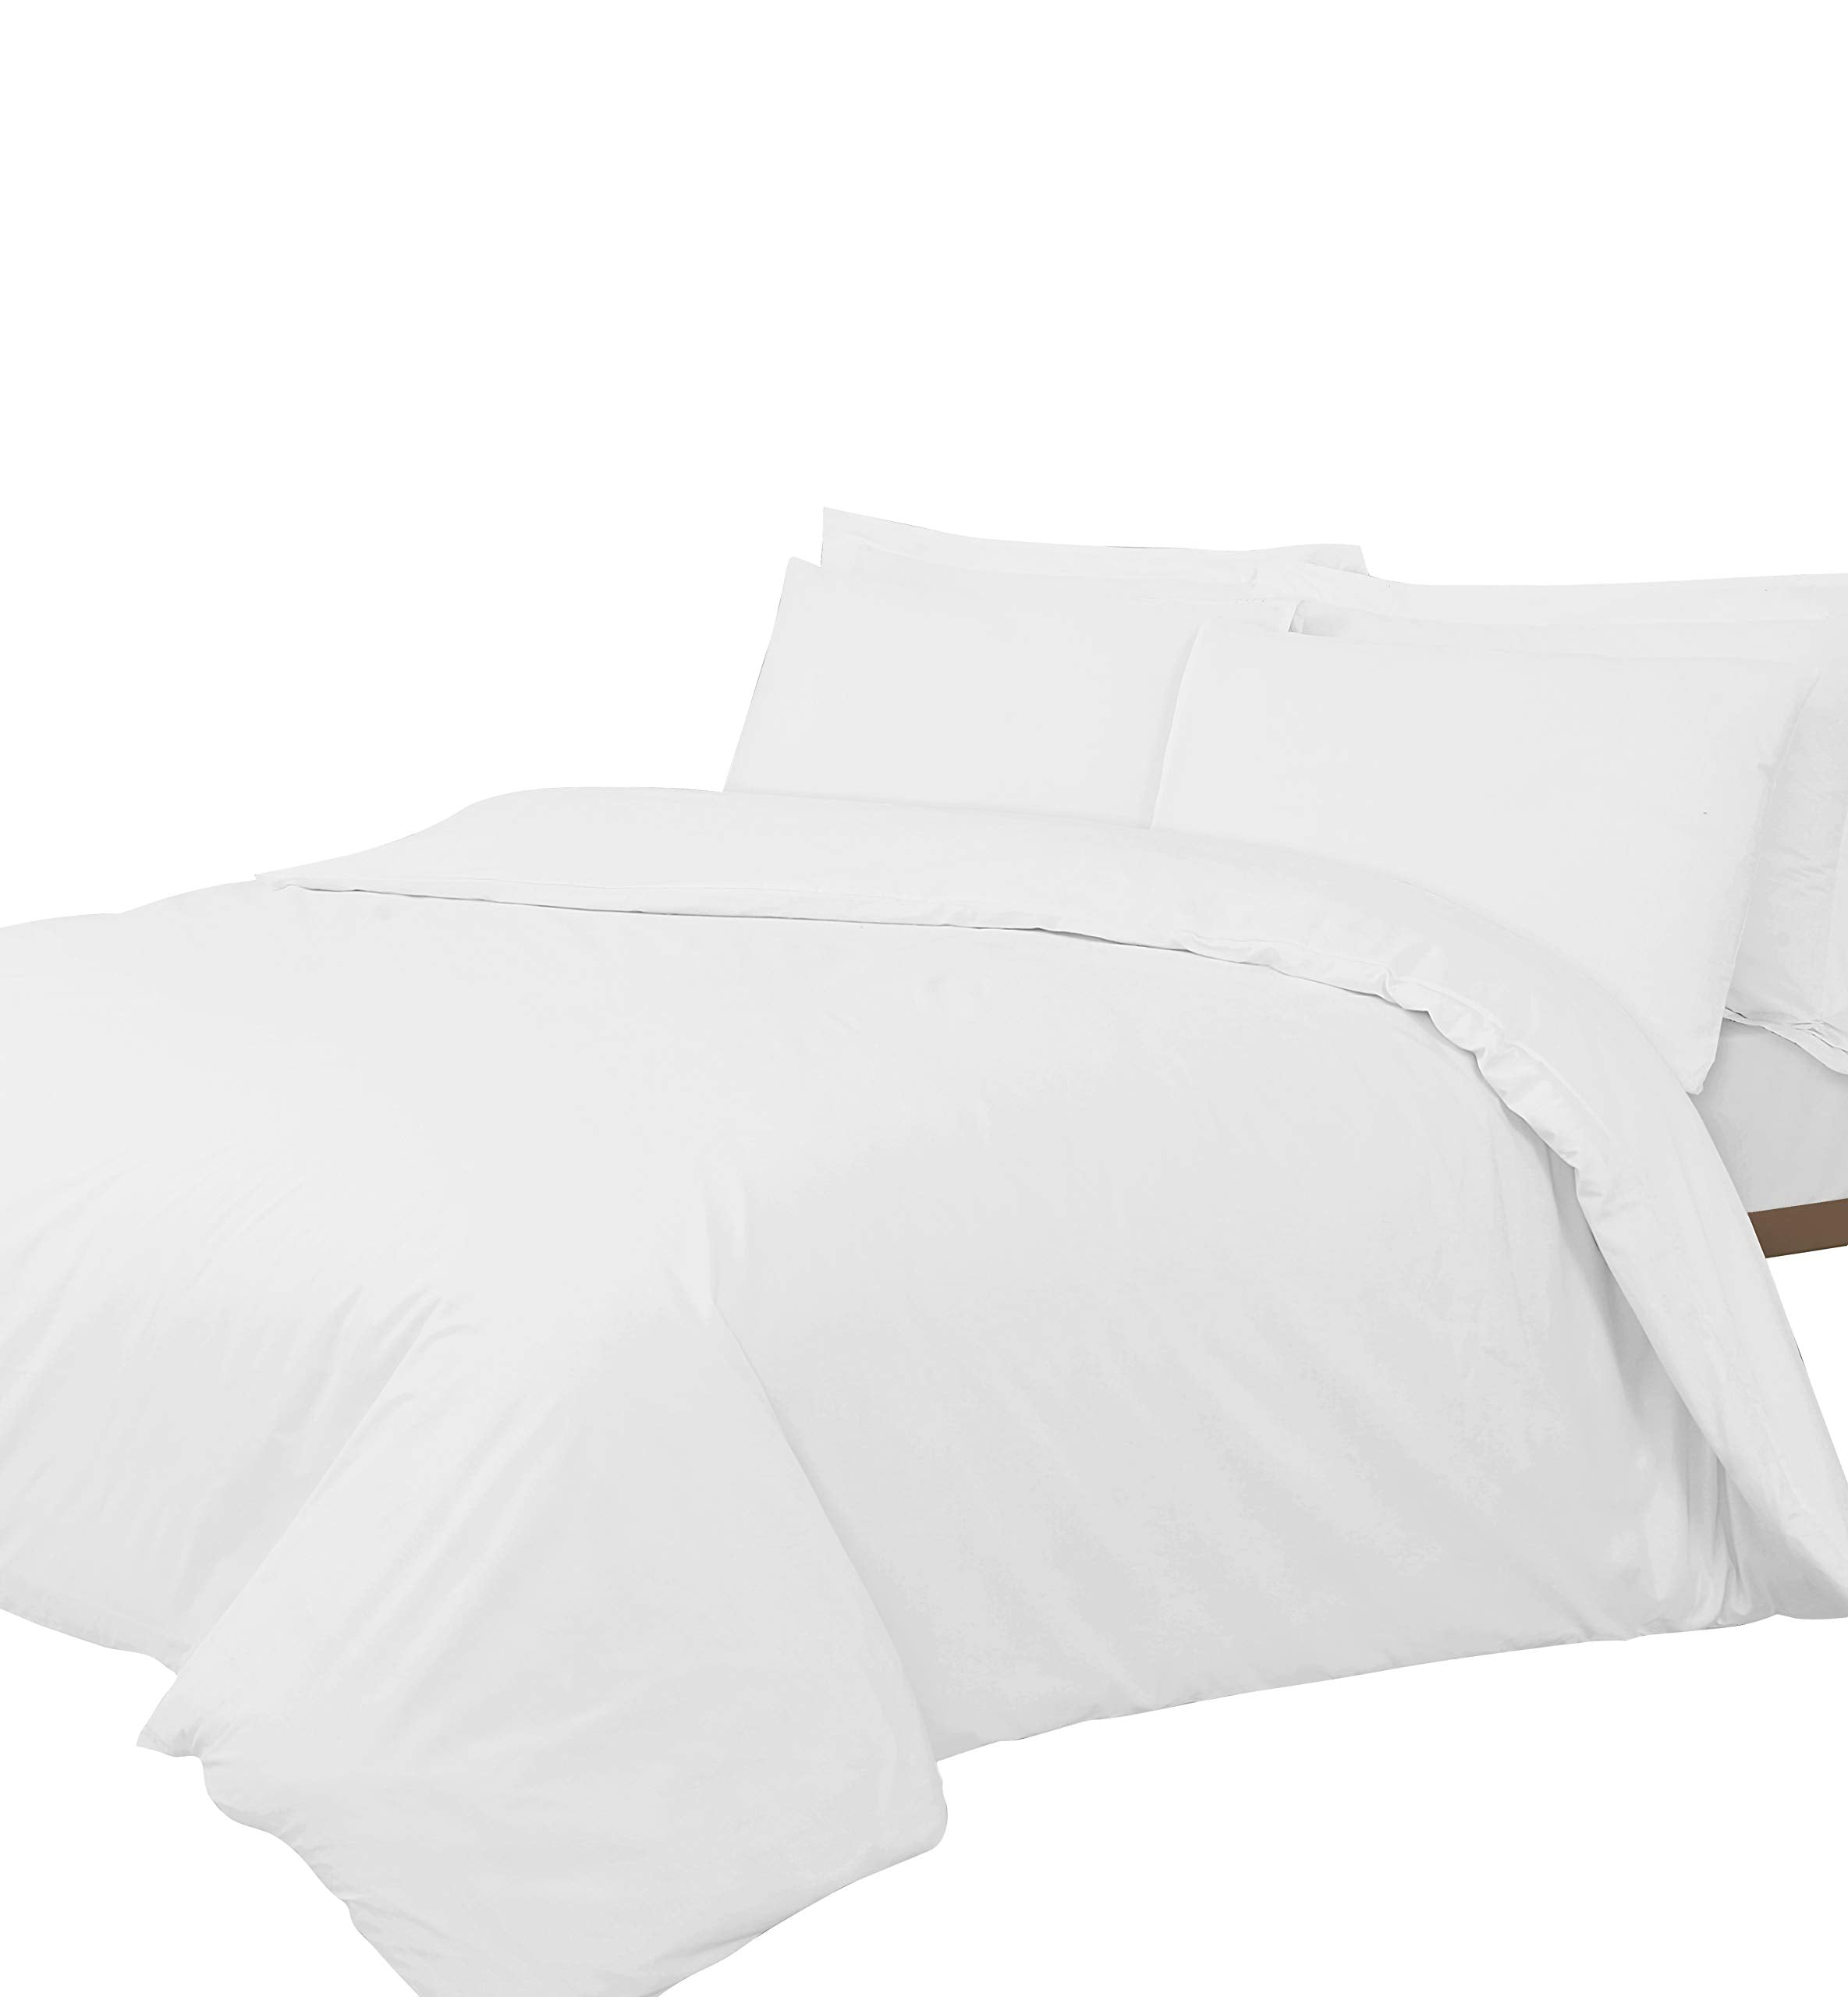 Indus Textiles 100% Egyptian Cotton 400 Thread Count 12"/30CM Depth Fitted Bed Sheets White Hotel Quality Bedding, Double